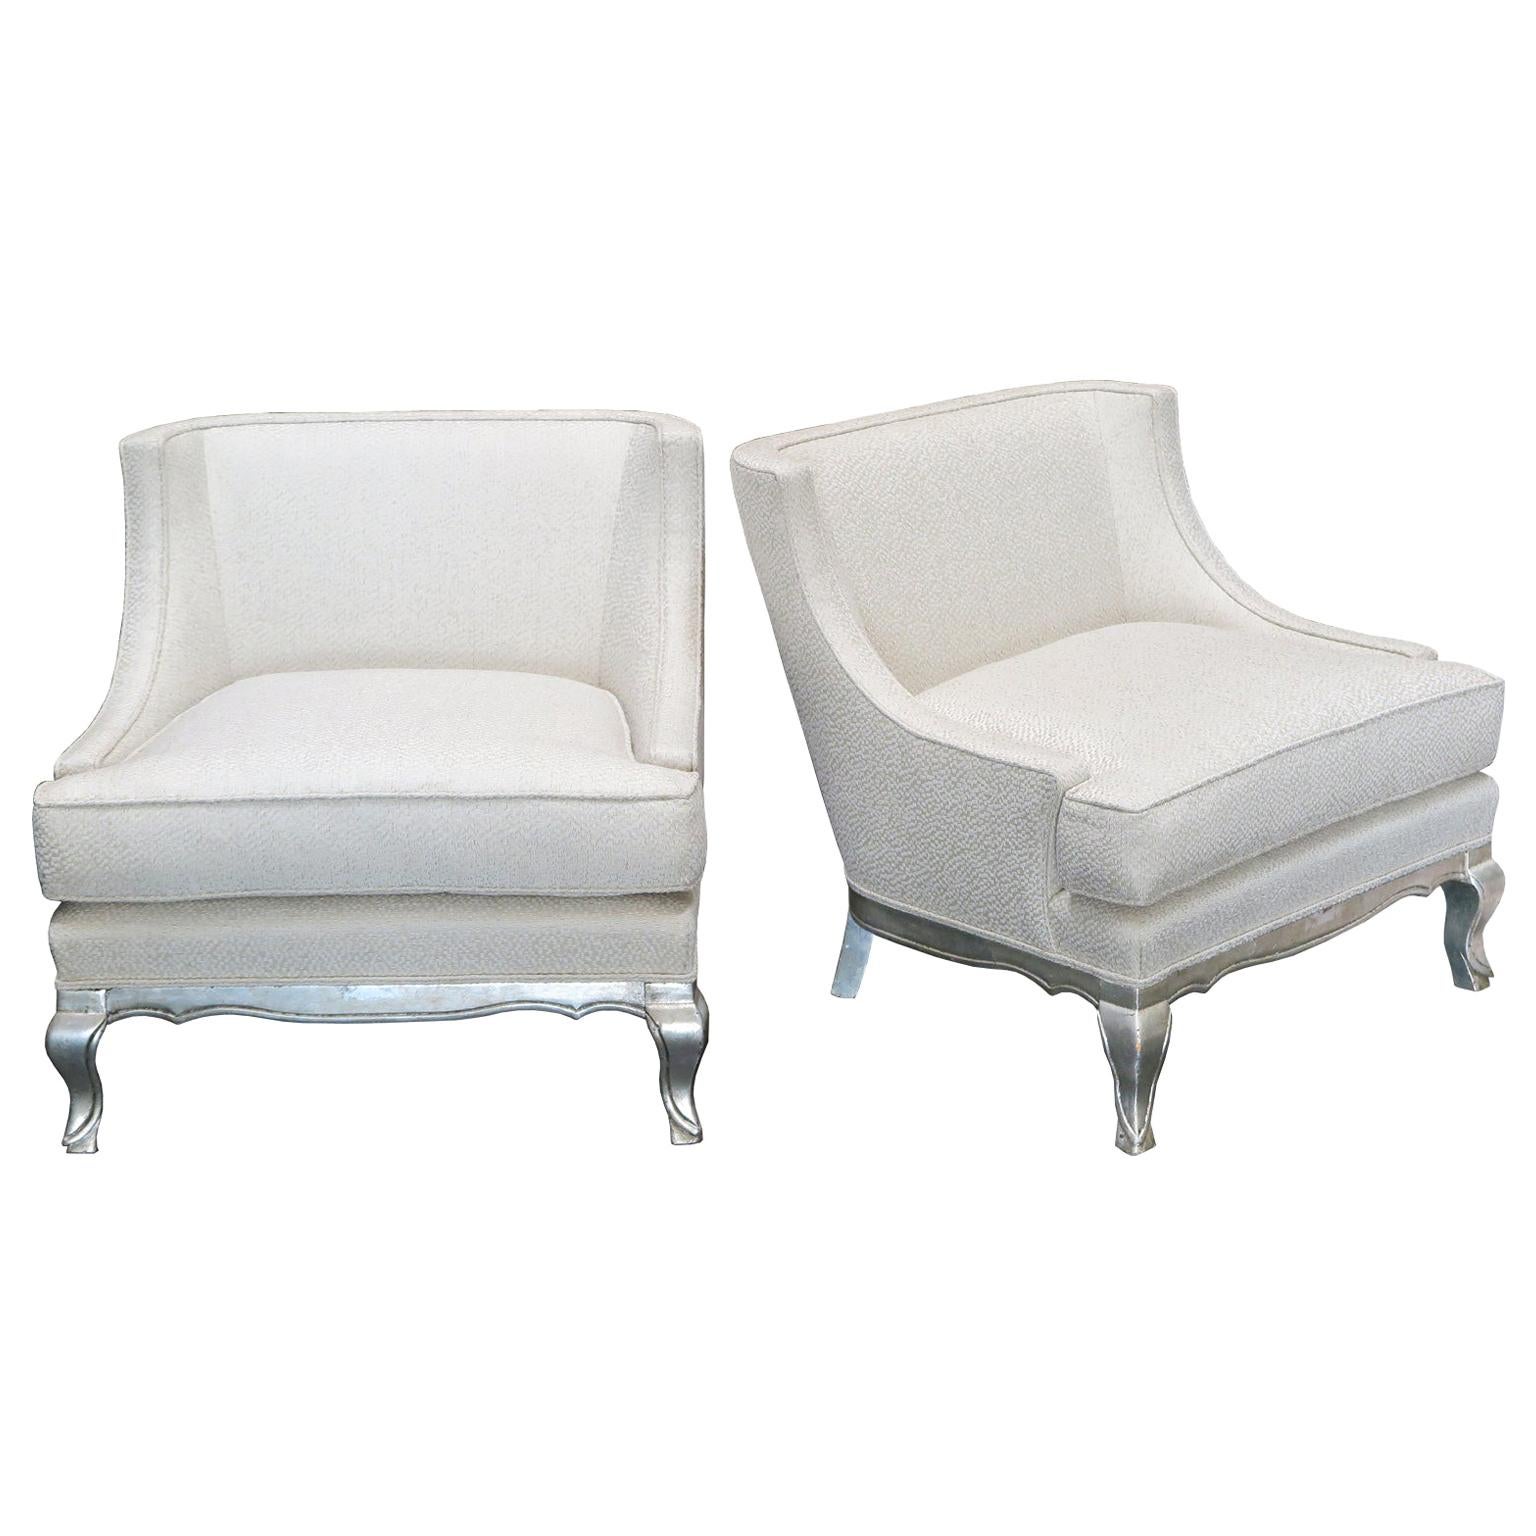 Pair of Midcentury Ivory Linen and Silk Lounge Chairs, USA, circa 1950s For Sale